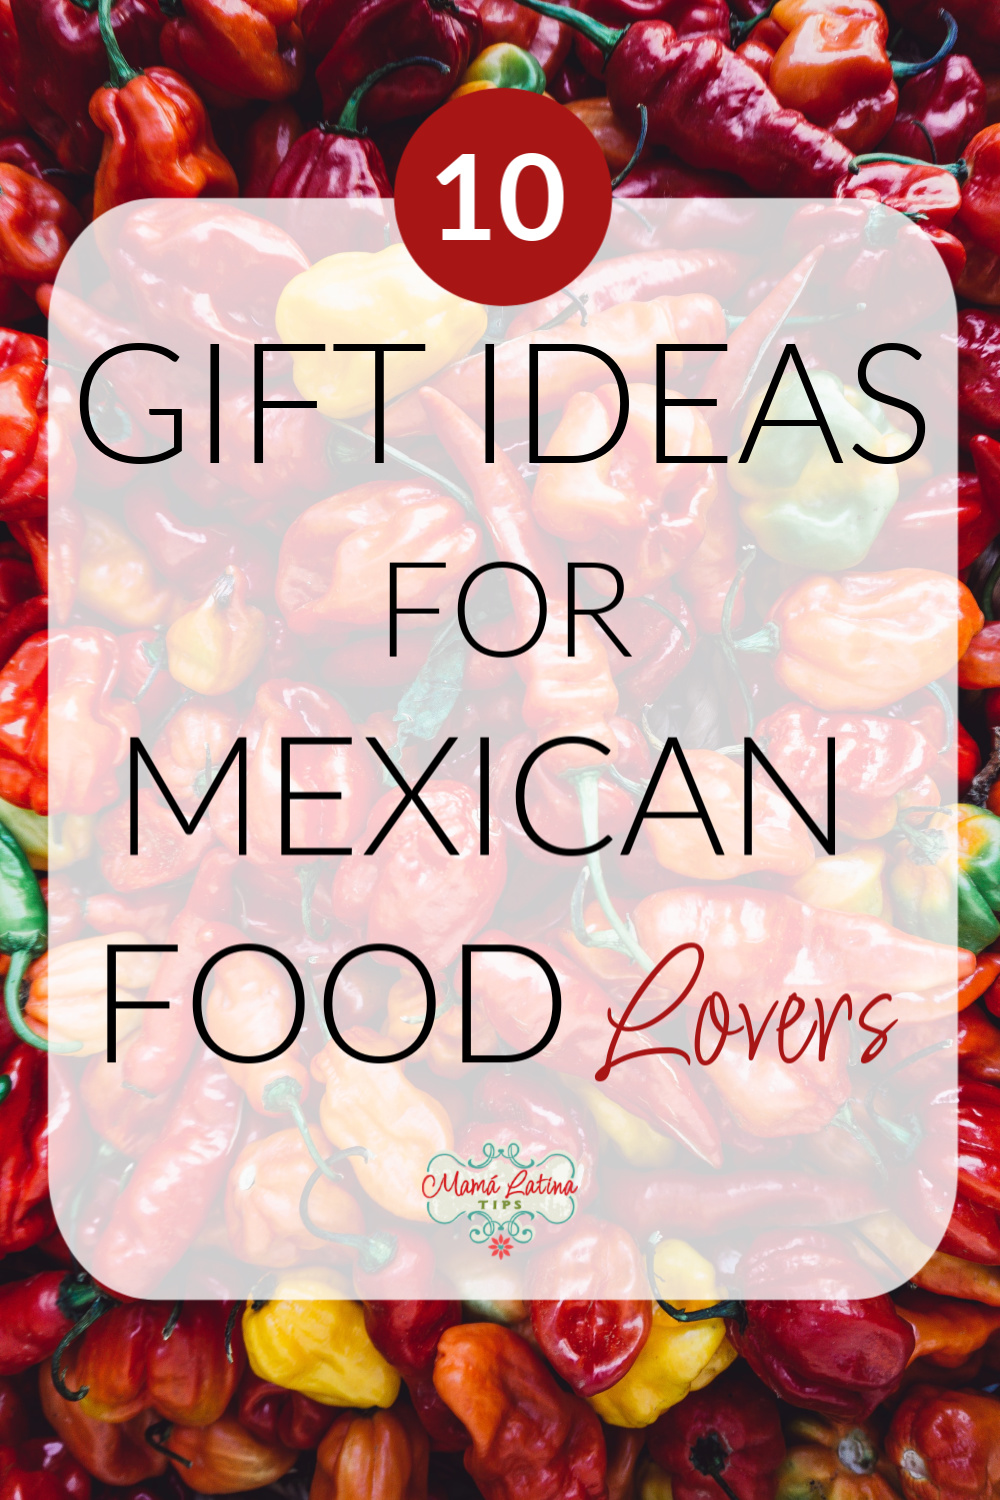 https://www.mamalatinatips.com/wp-content/uploads/2019/12/Gift-Guide-Mexican-Food.jpg